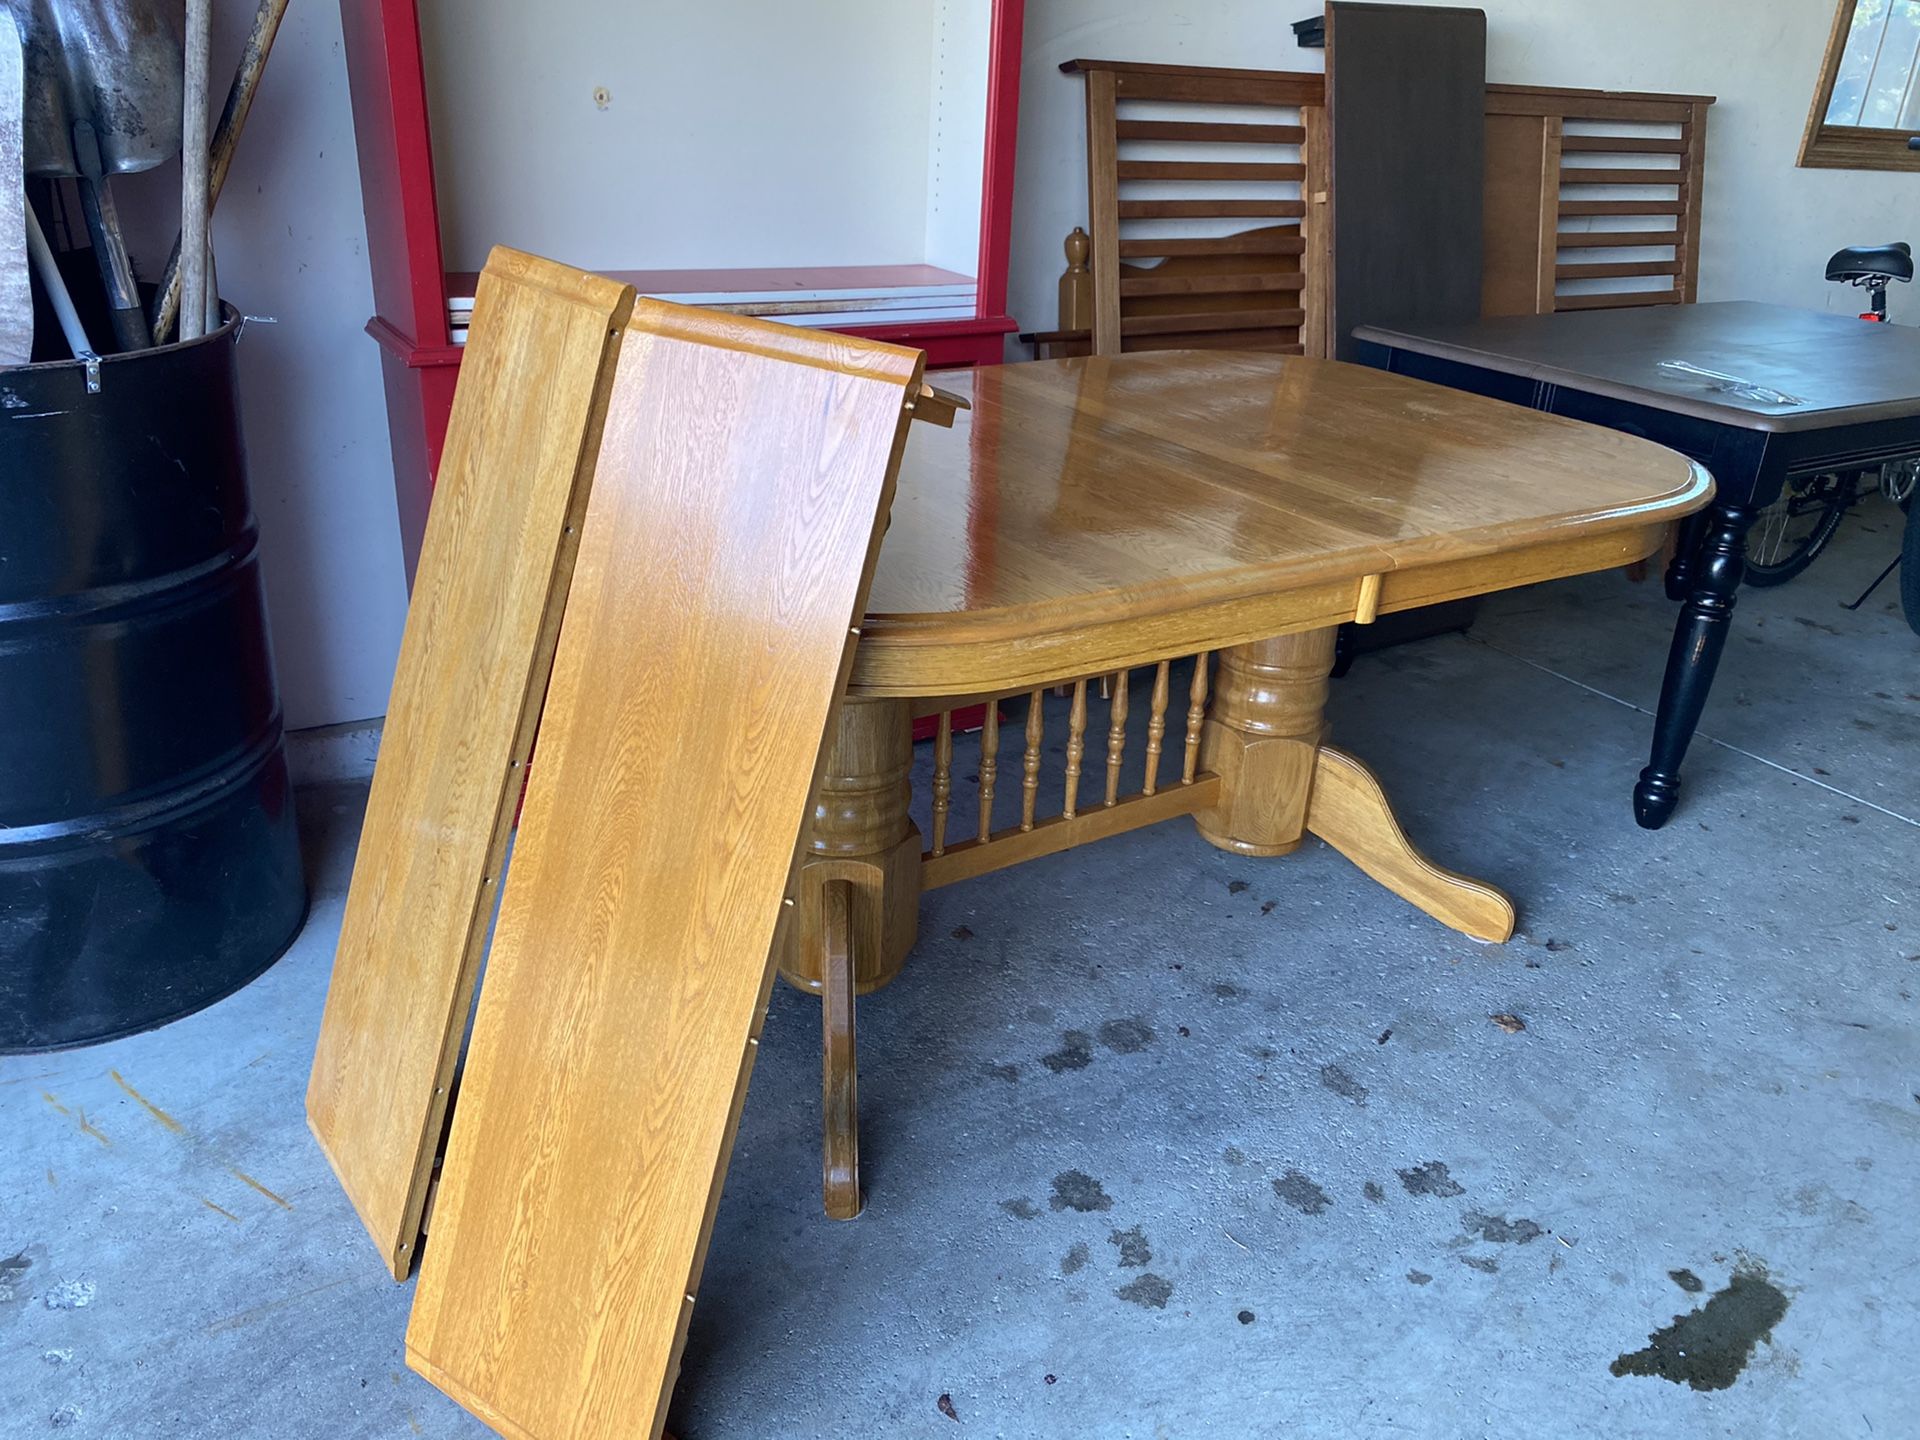 Table honey oak with 2 leaves with 4 chairs . Pick up Dousman or can deliver for $25 more